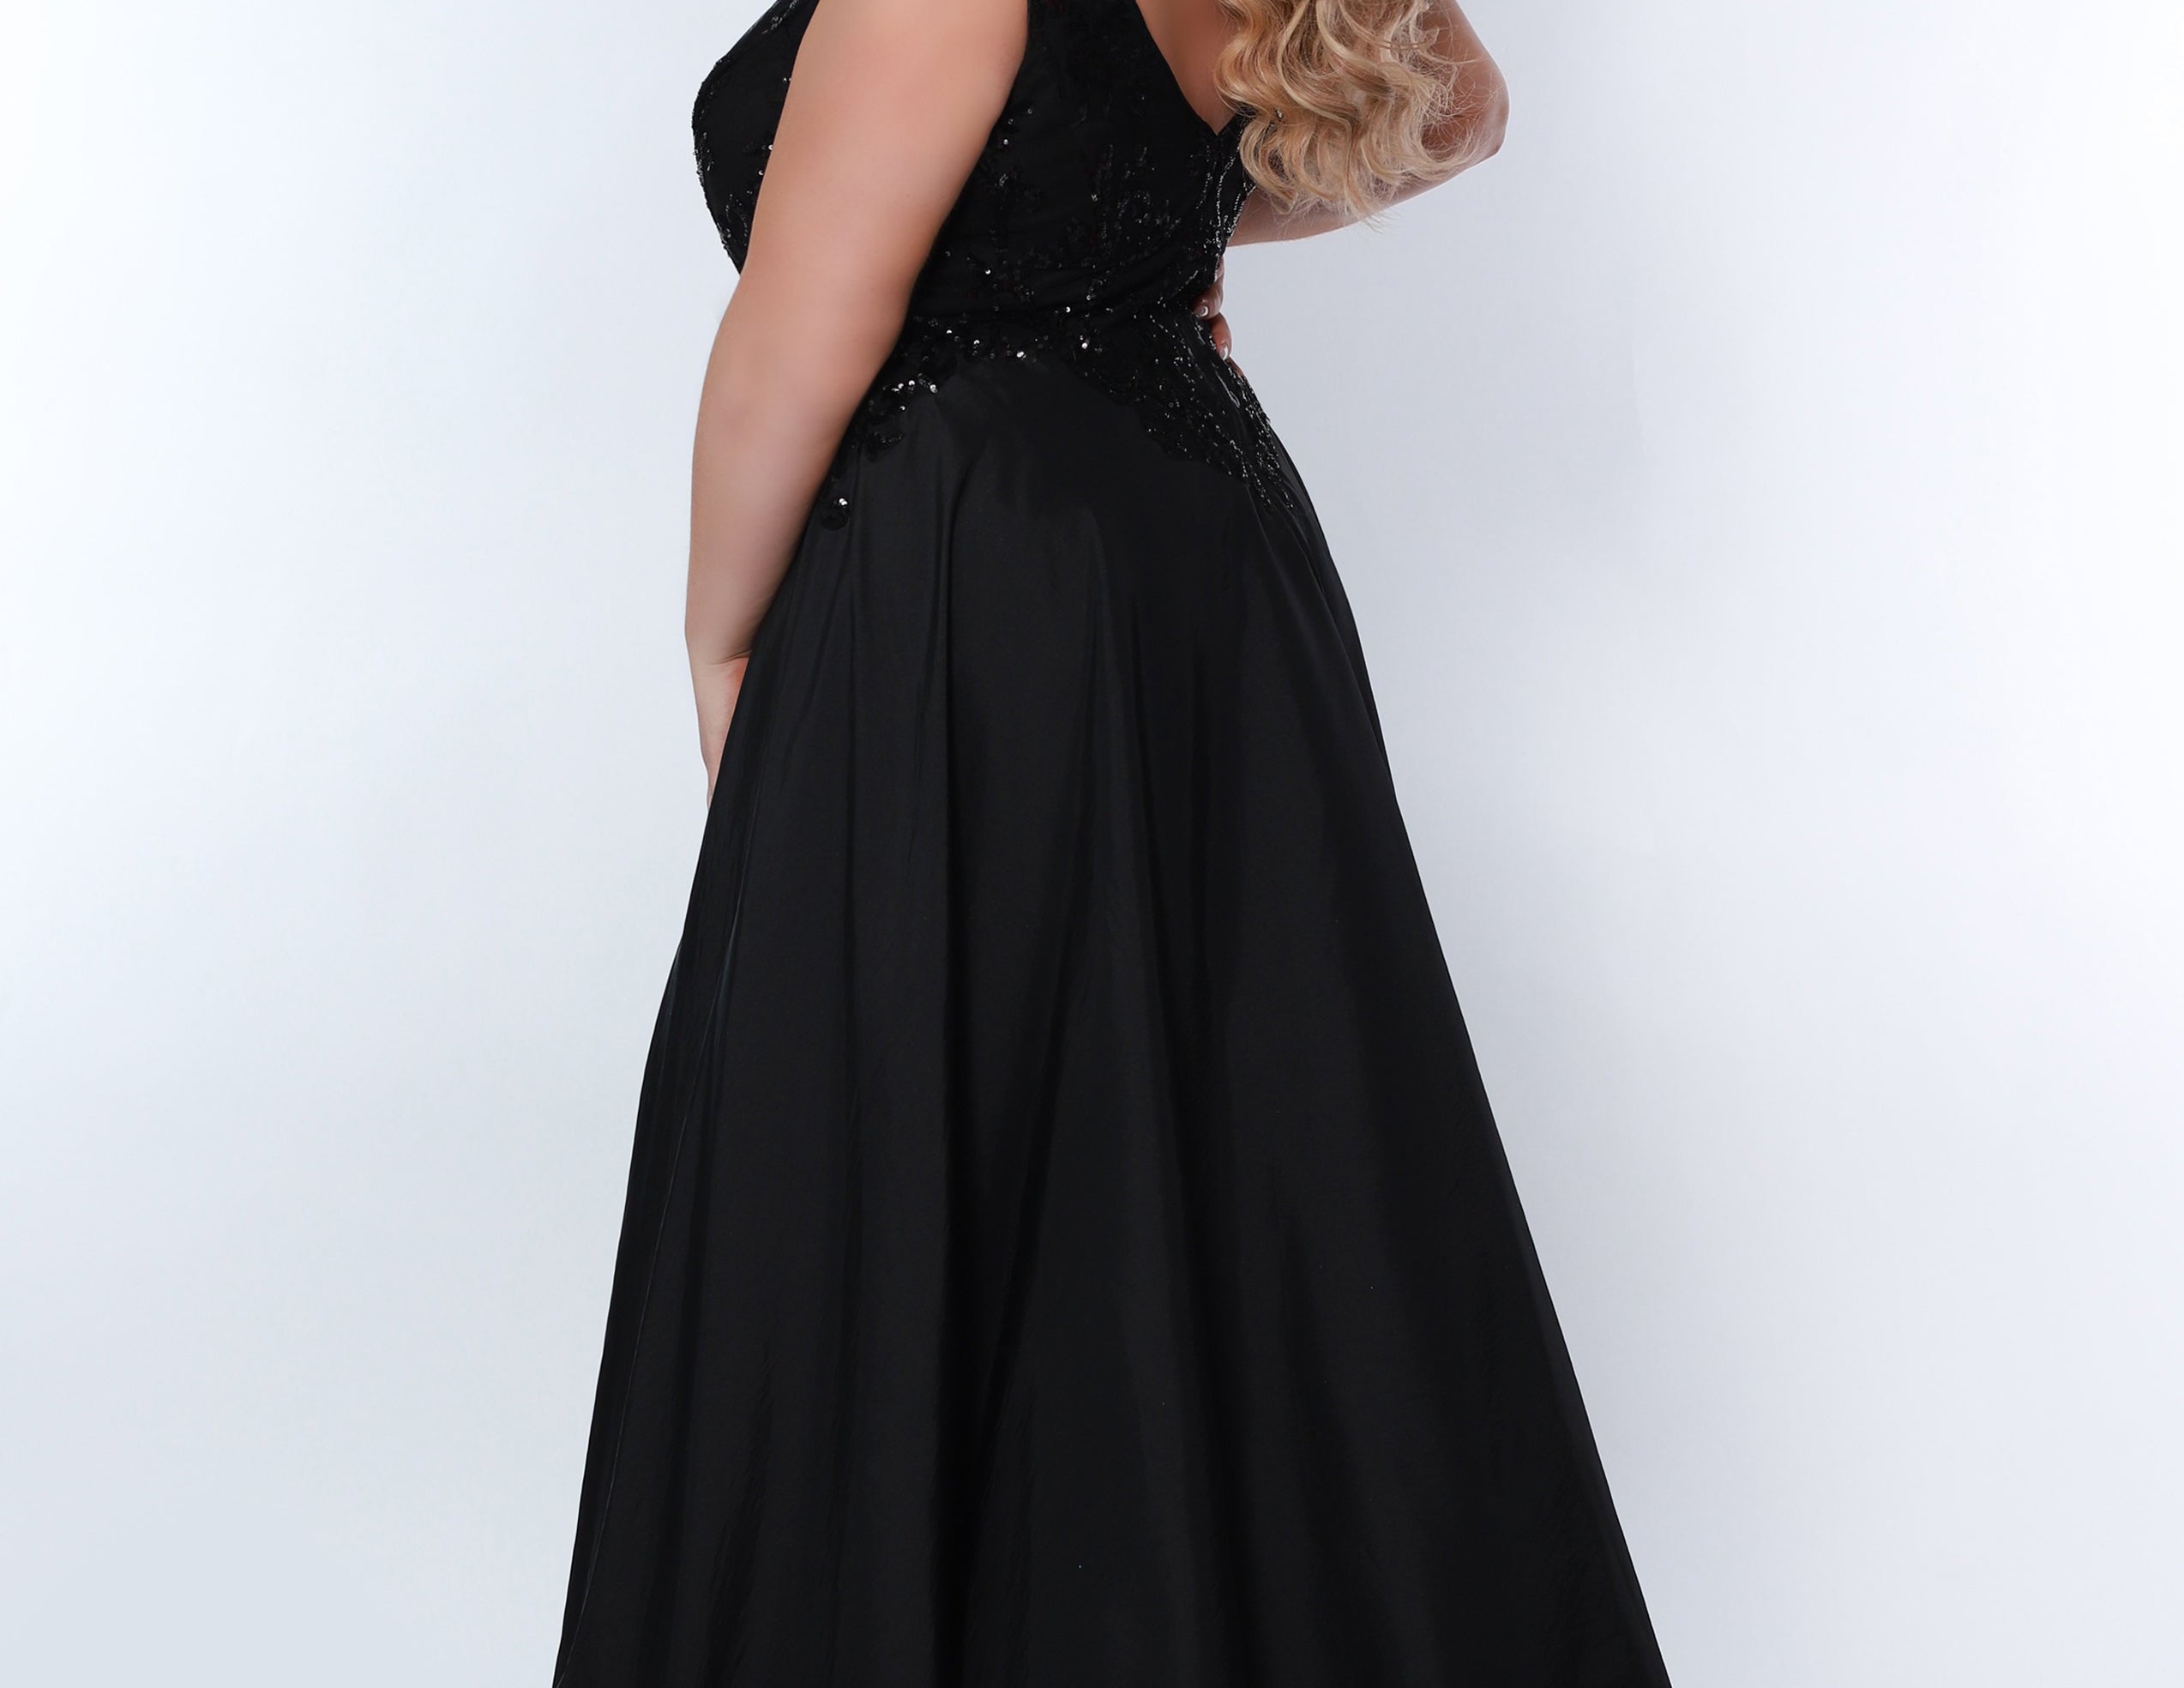 Sydney’s Closet SC7341 Black.  Slim/Fitted silhouette, deep V-neckline and bra-friendly straps. Natural waistline, sequins on net. Mid-thigh skirt with attached charmeuse overskirt. Center  back zipper. 